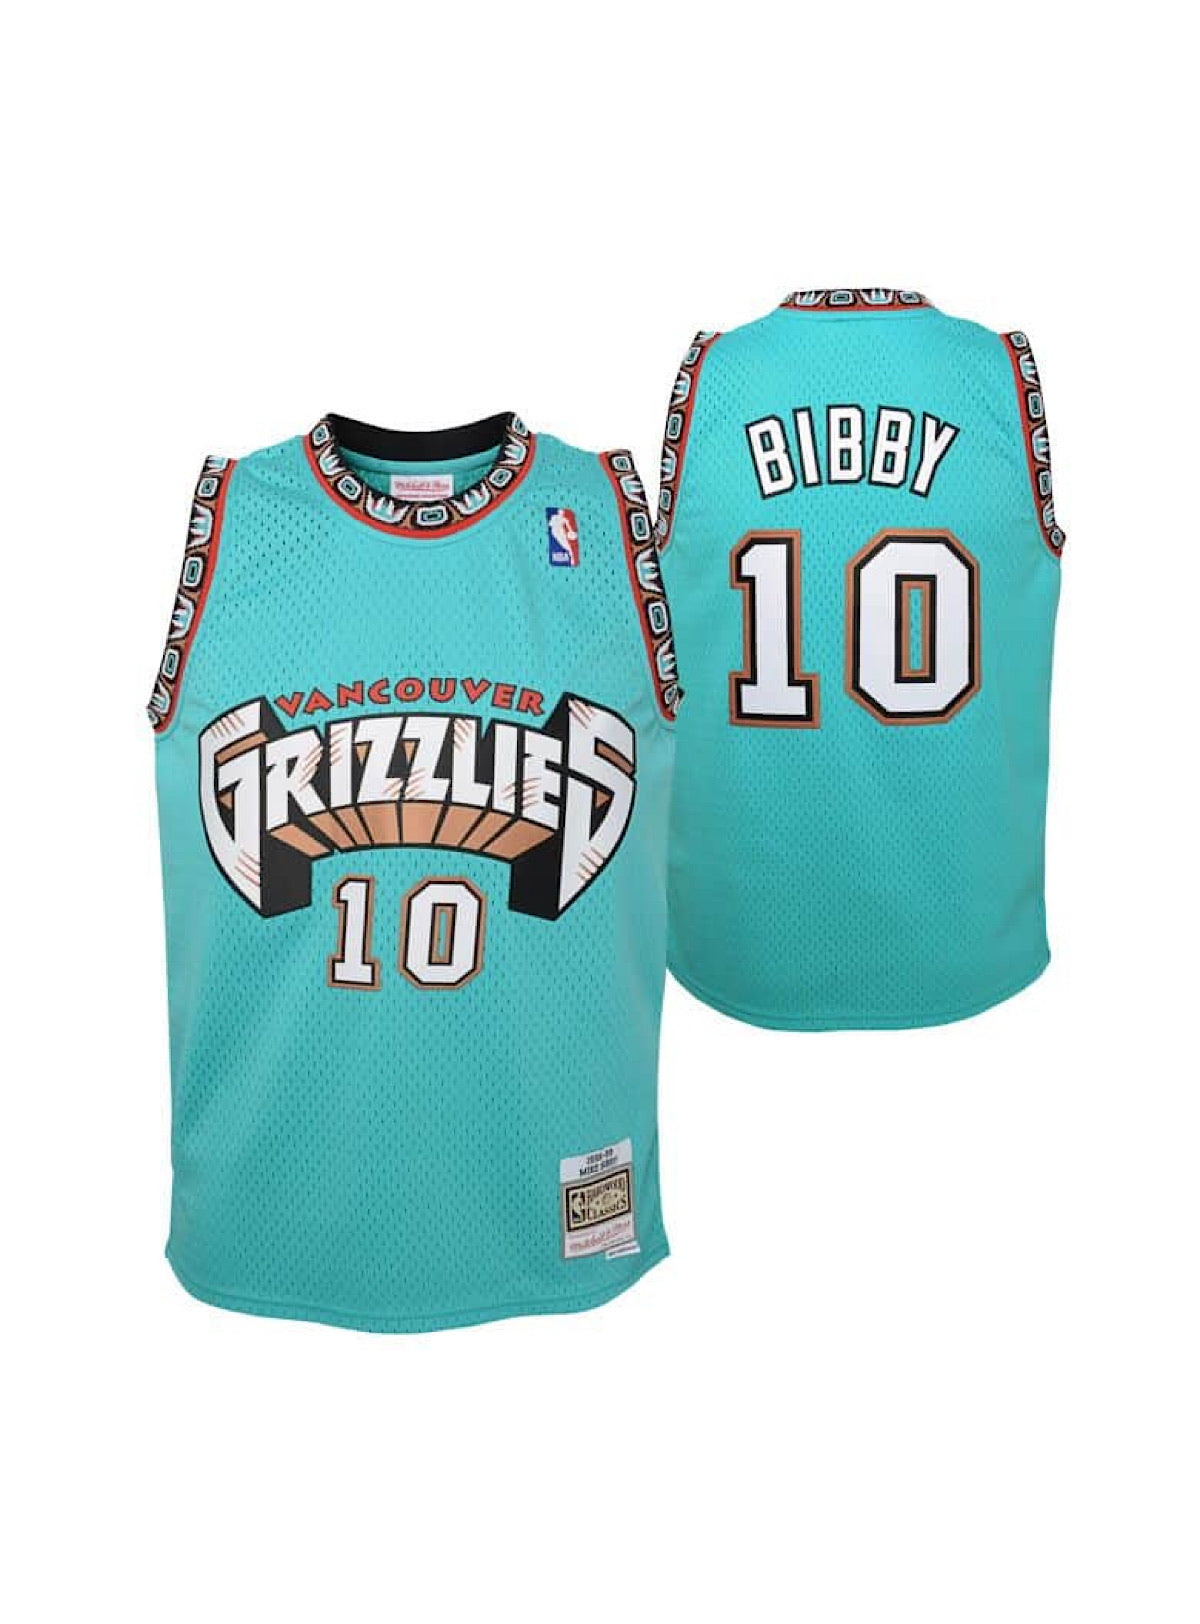 MITCHELL AND NESS 1278-GRIZZLIES